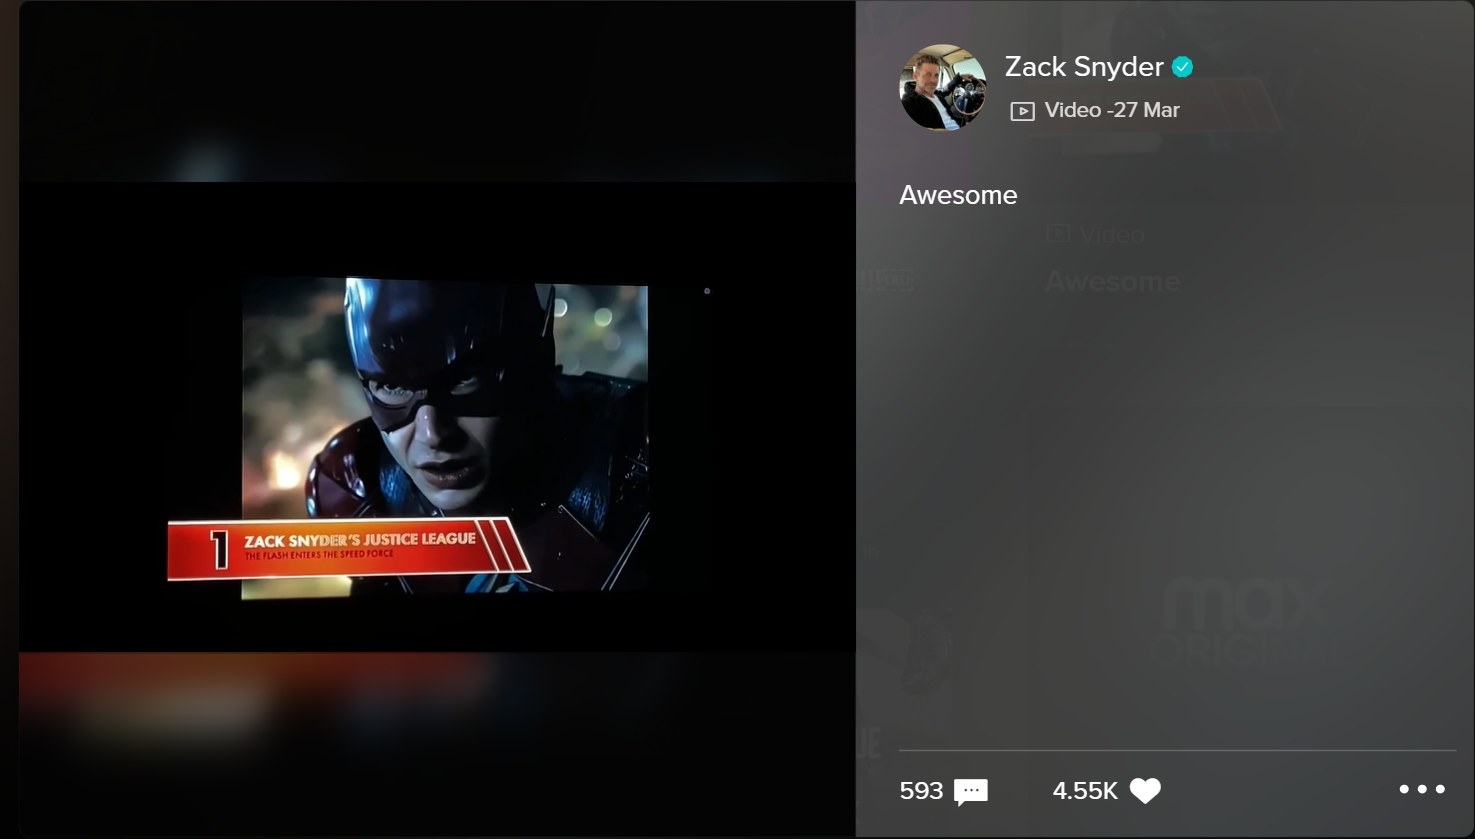 A post by Zack Snyder on social media platform Vero saying &quot;Awesome&quot; accompanied by a video showcasing his cut of Justice League winning the Oscar for Best Cheer Worthy Moment.